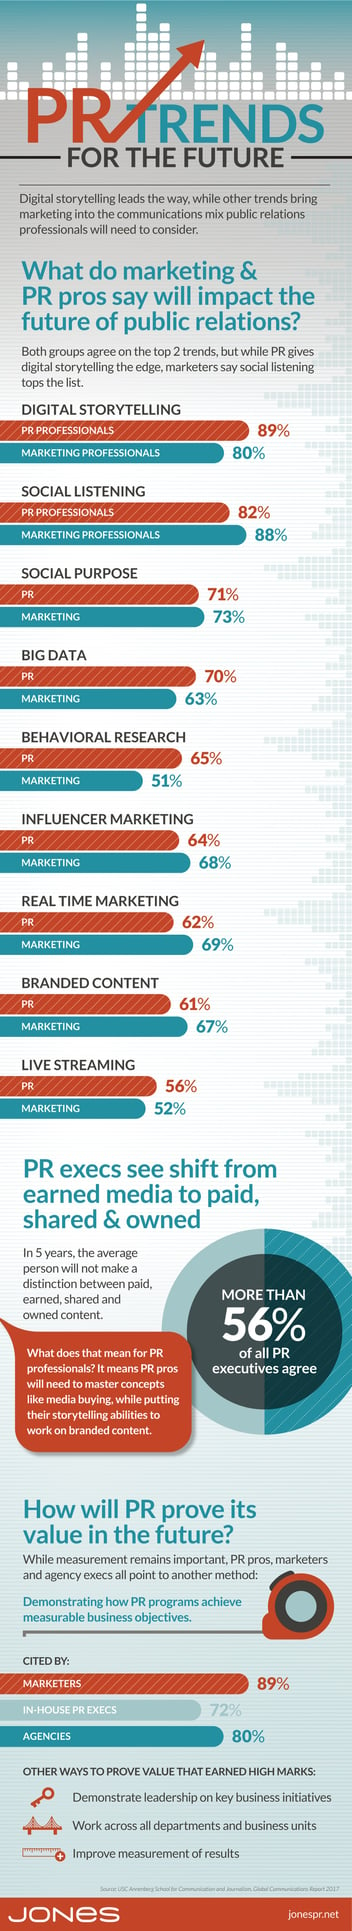 PR Trends for the Future (infographic)